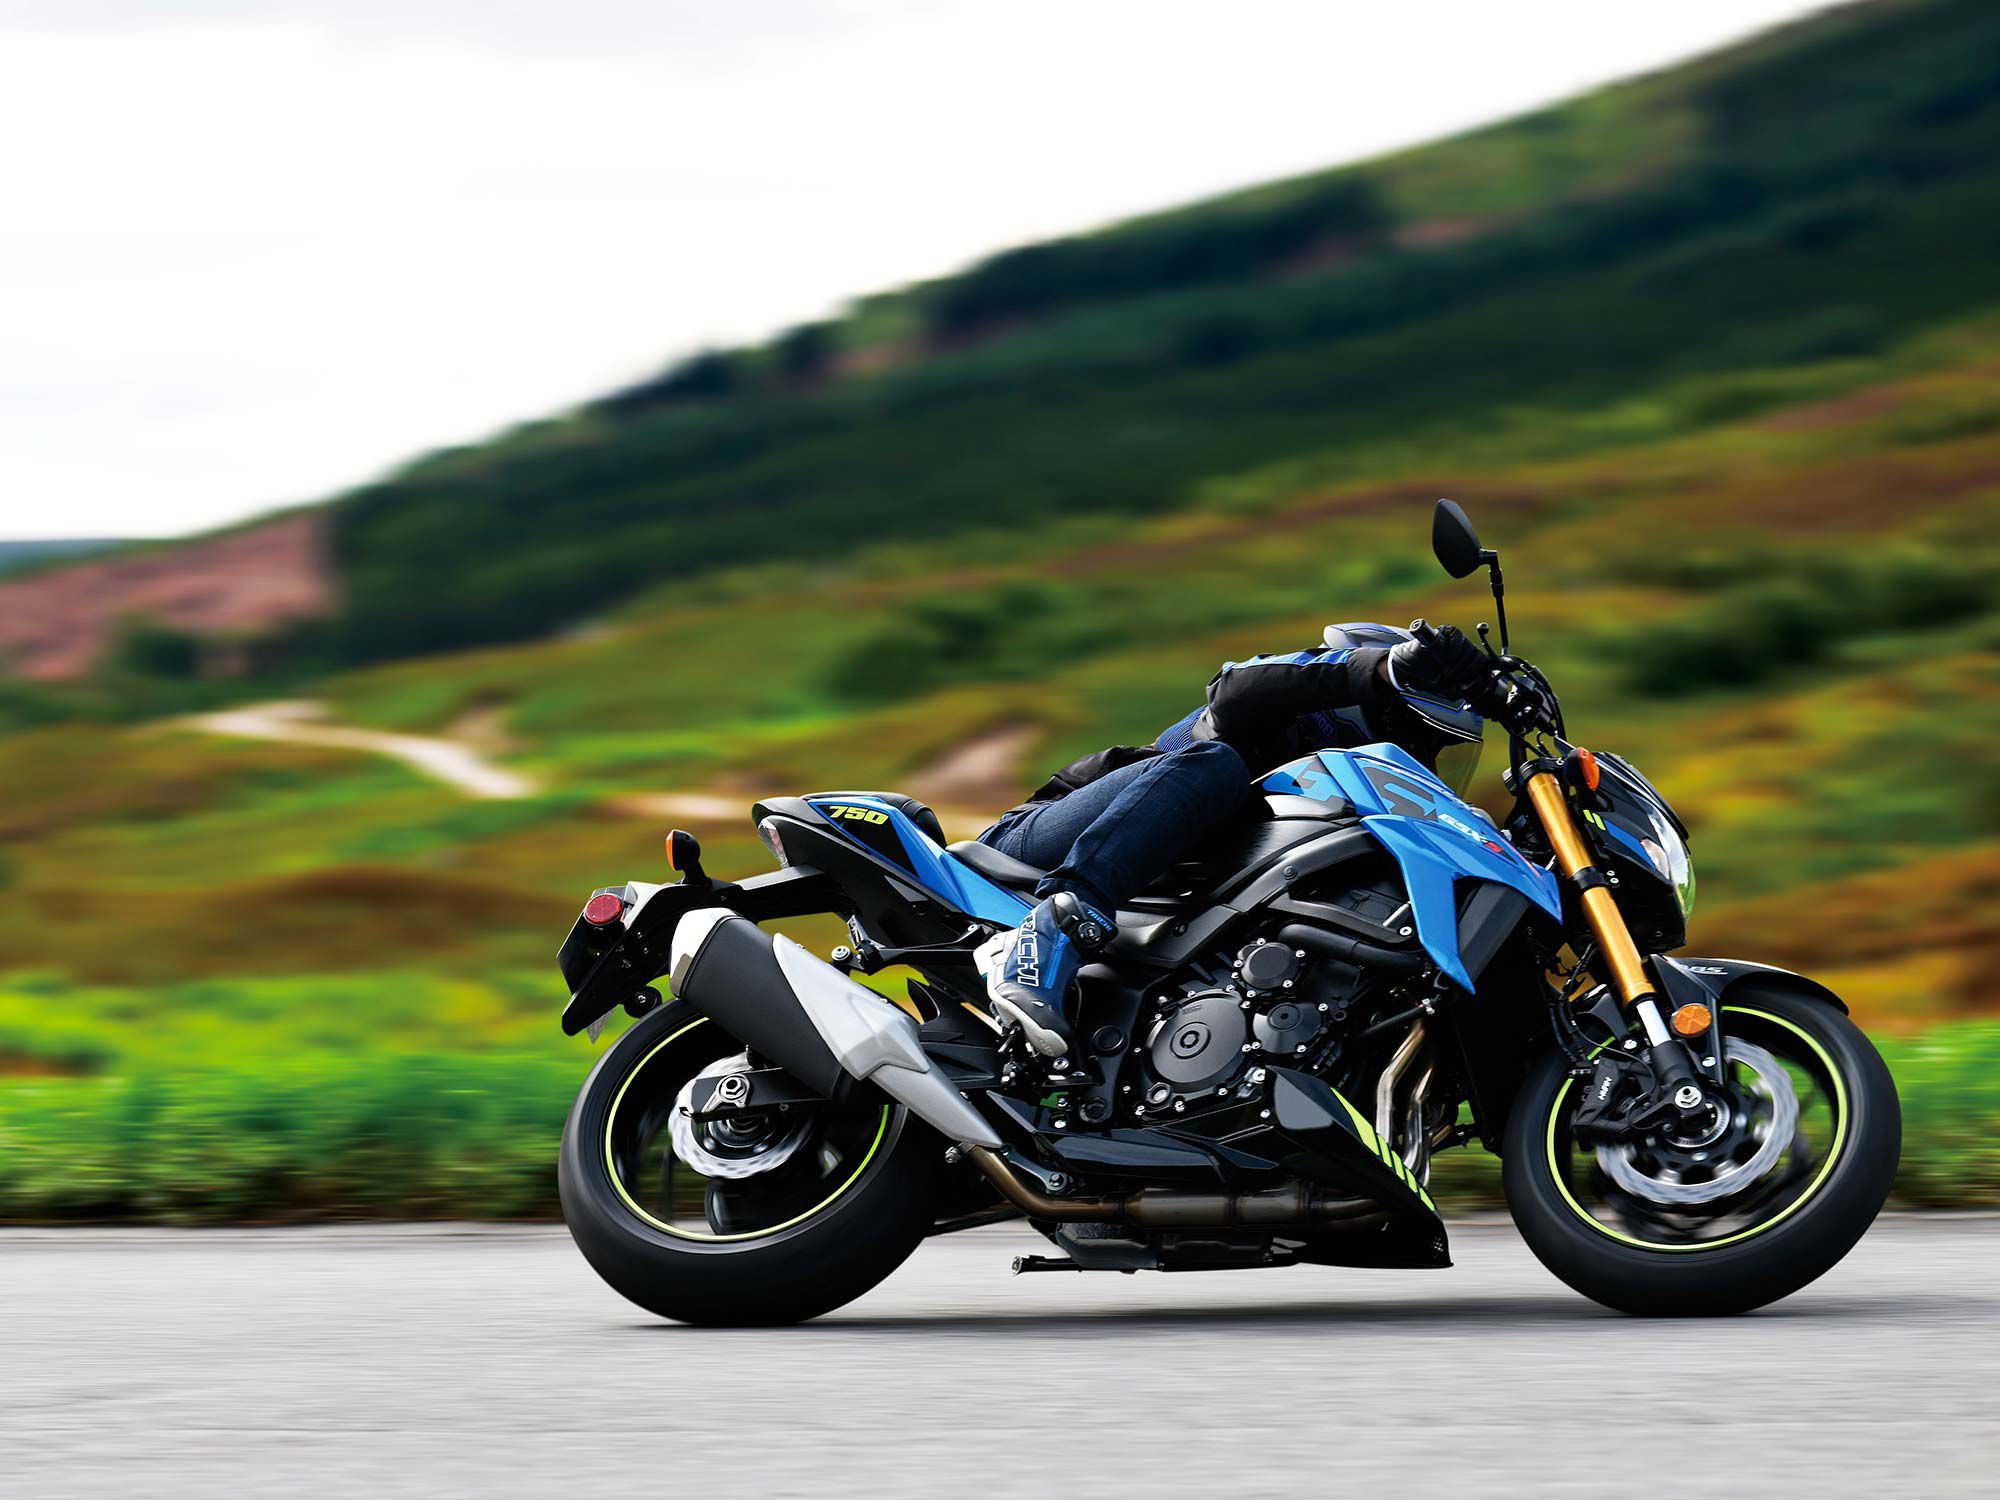 The GSX-S750 is not the most sporty middleweight naked on the market, but there’s still sportbike DNA in the package.